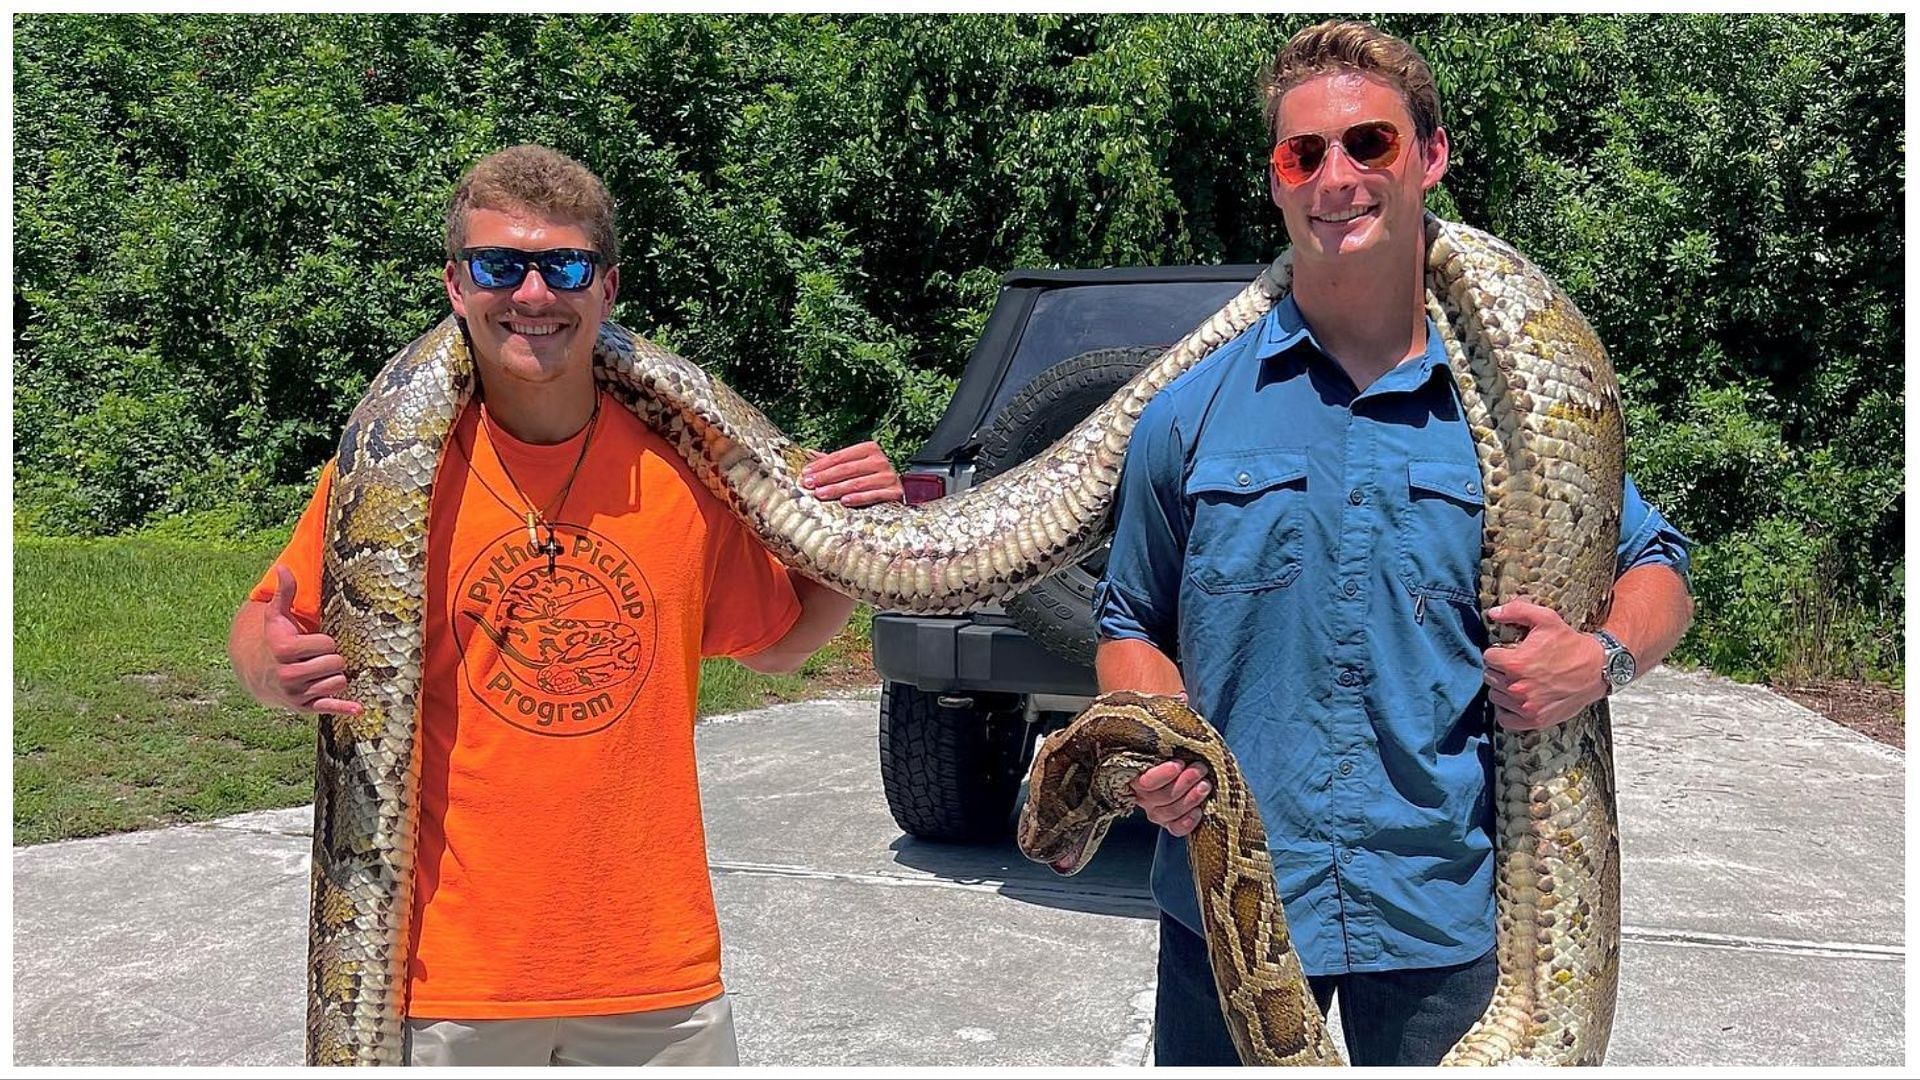 A record breaking Burmese Python, caught in Florida captivated the Internet (Image via Instagram/@gladesboys)